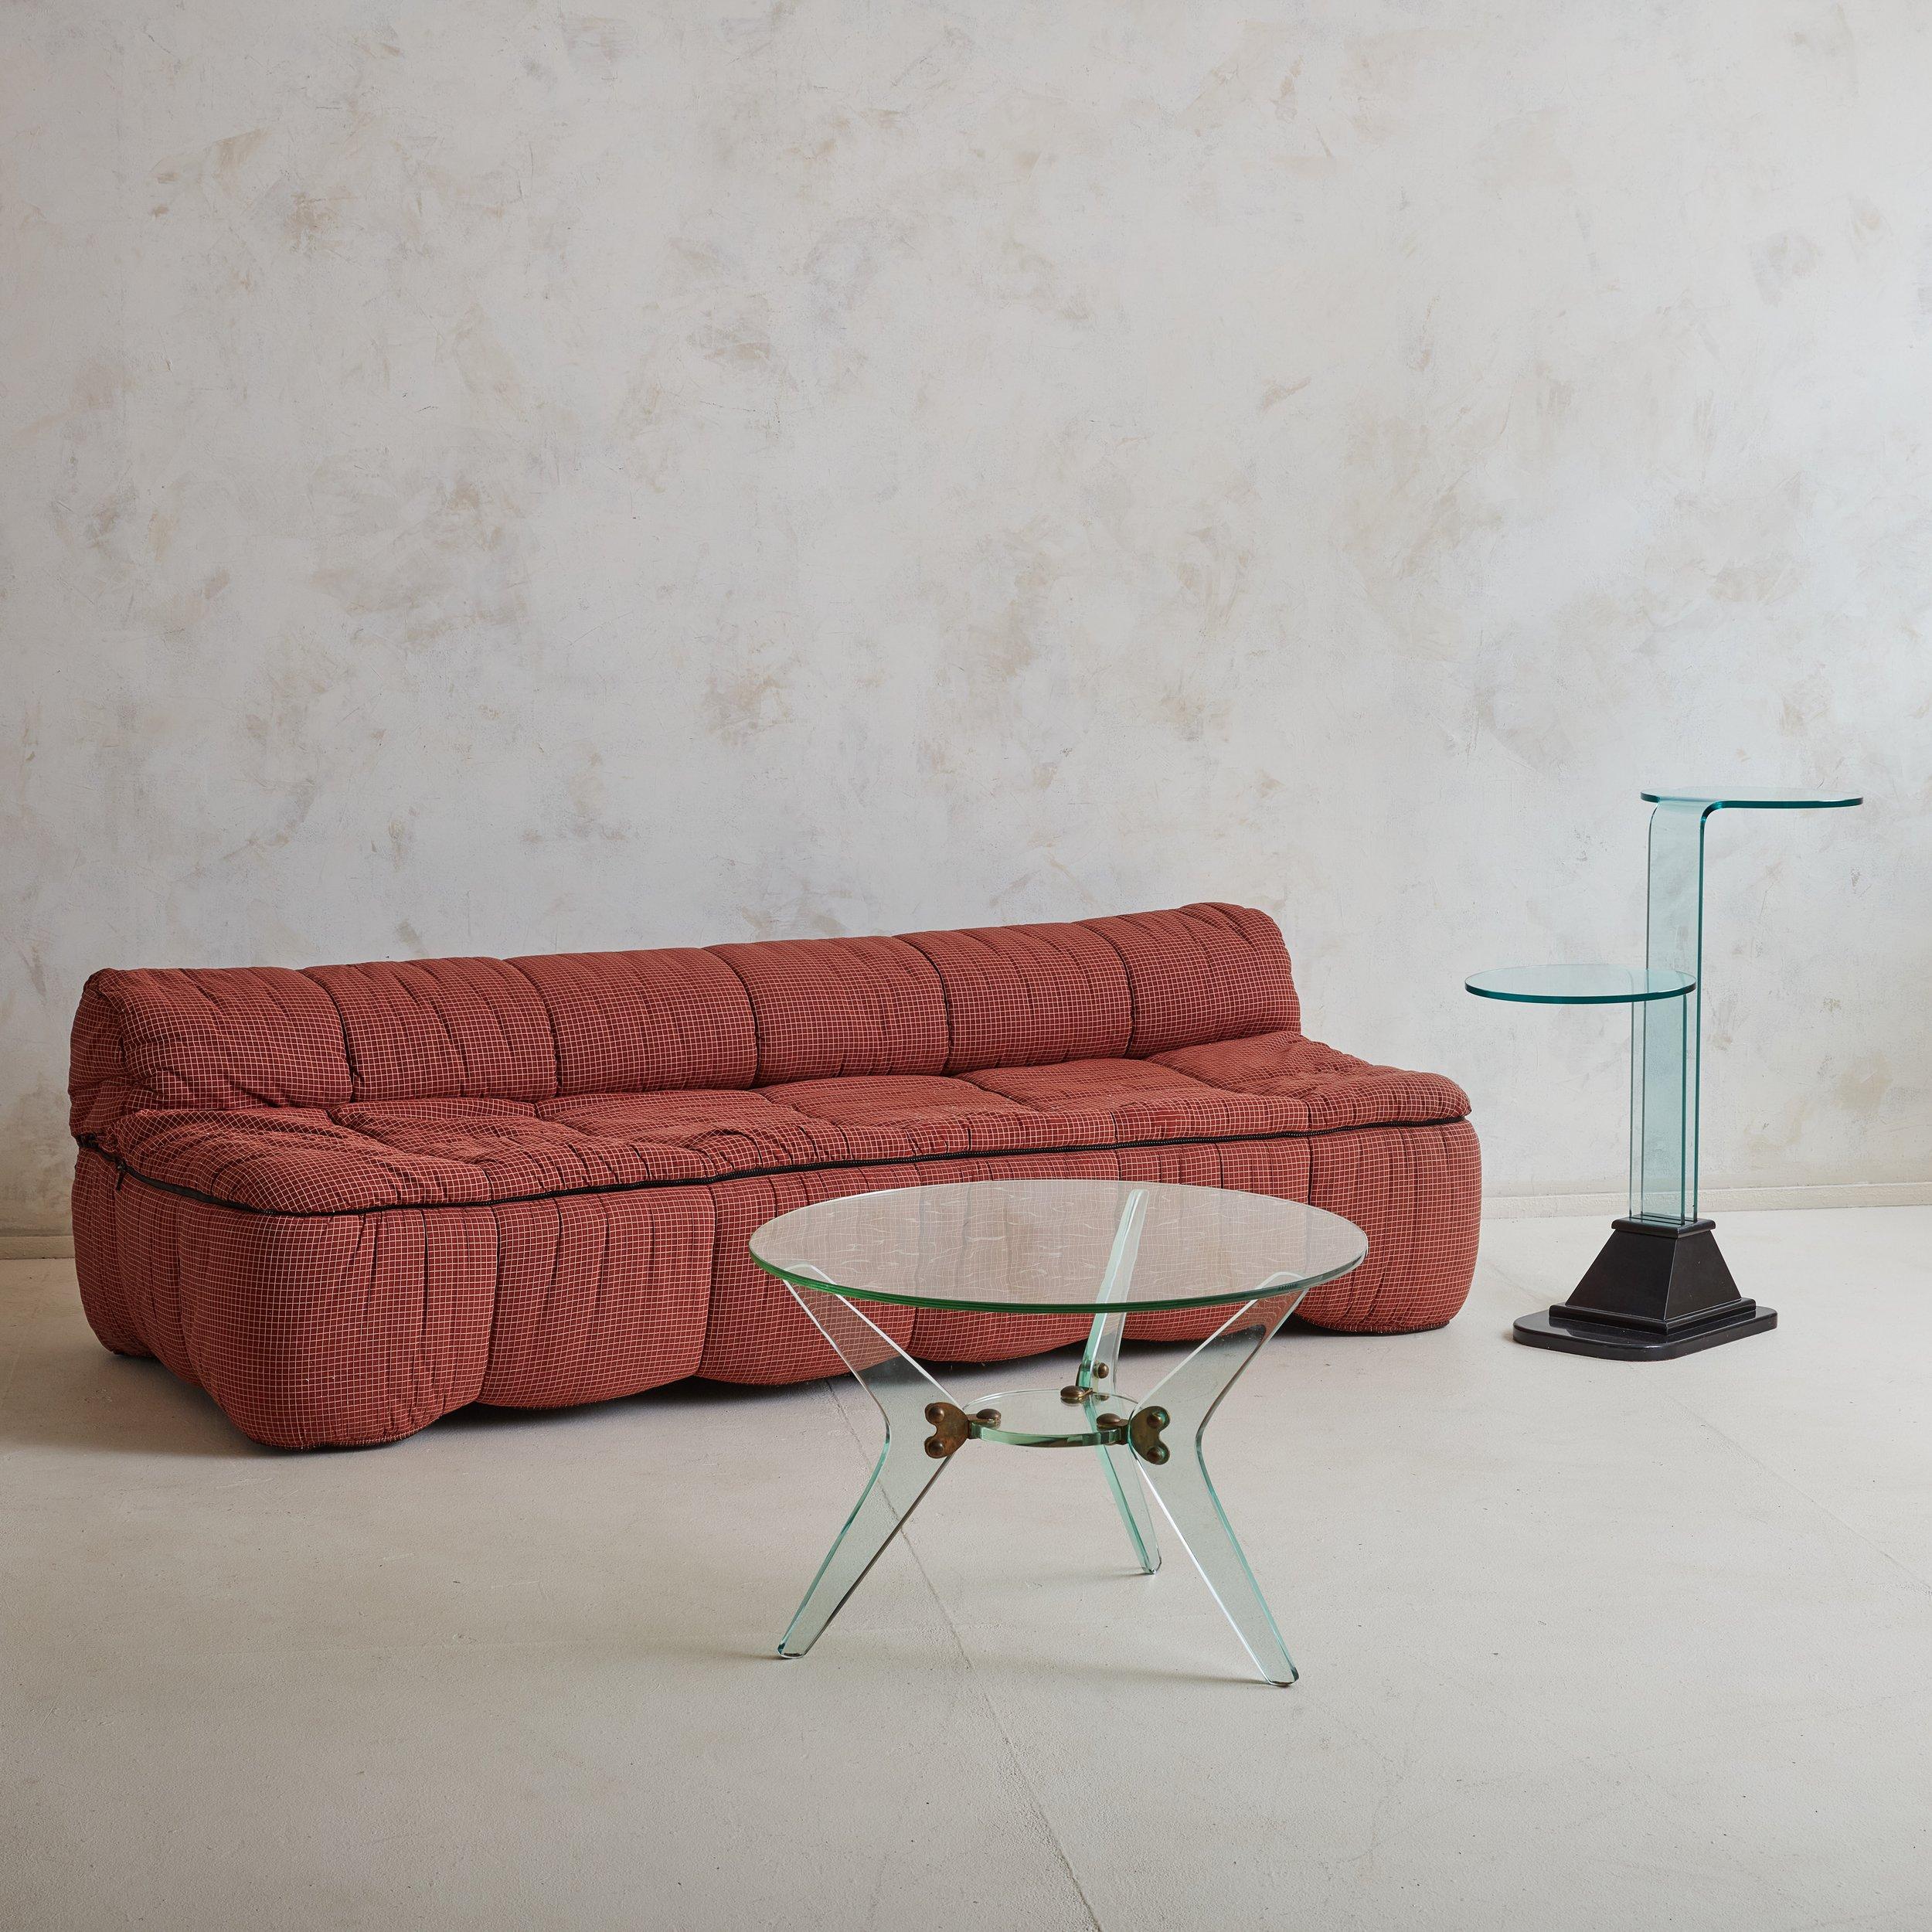 A petite Italian round glass cocktail table in the style of Fontana Arte. This cocktail table features a tripod base with sculptural boomerang legs and a round glass top. Natural patinaed bronze hardware secures the piece, adding beautiful contrast